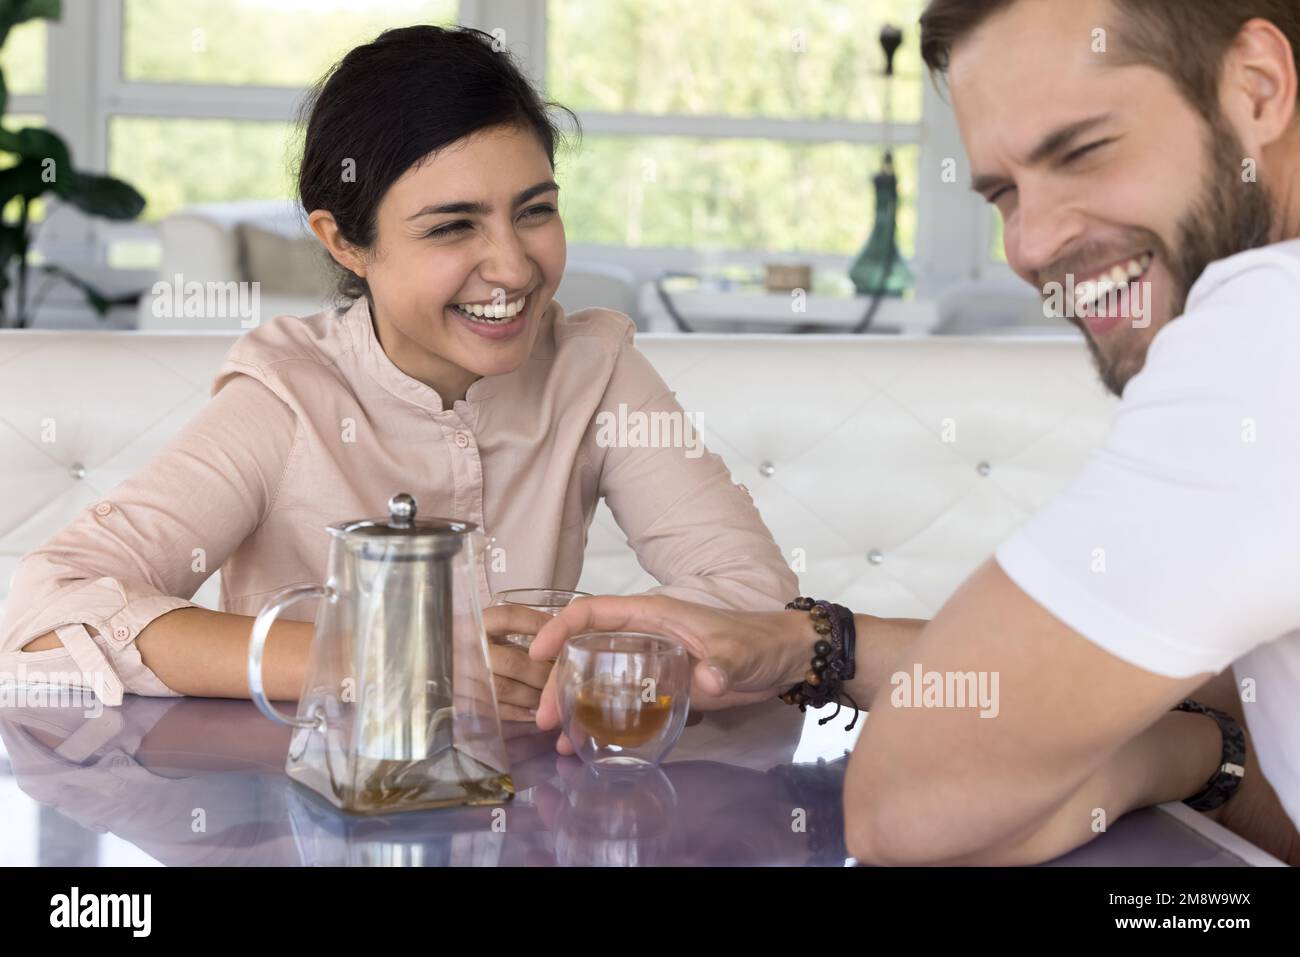 Cheerful pretty young Indian woman and handsome guy having fun Stock Photo